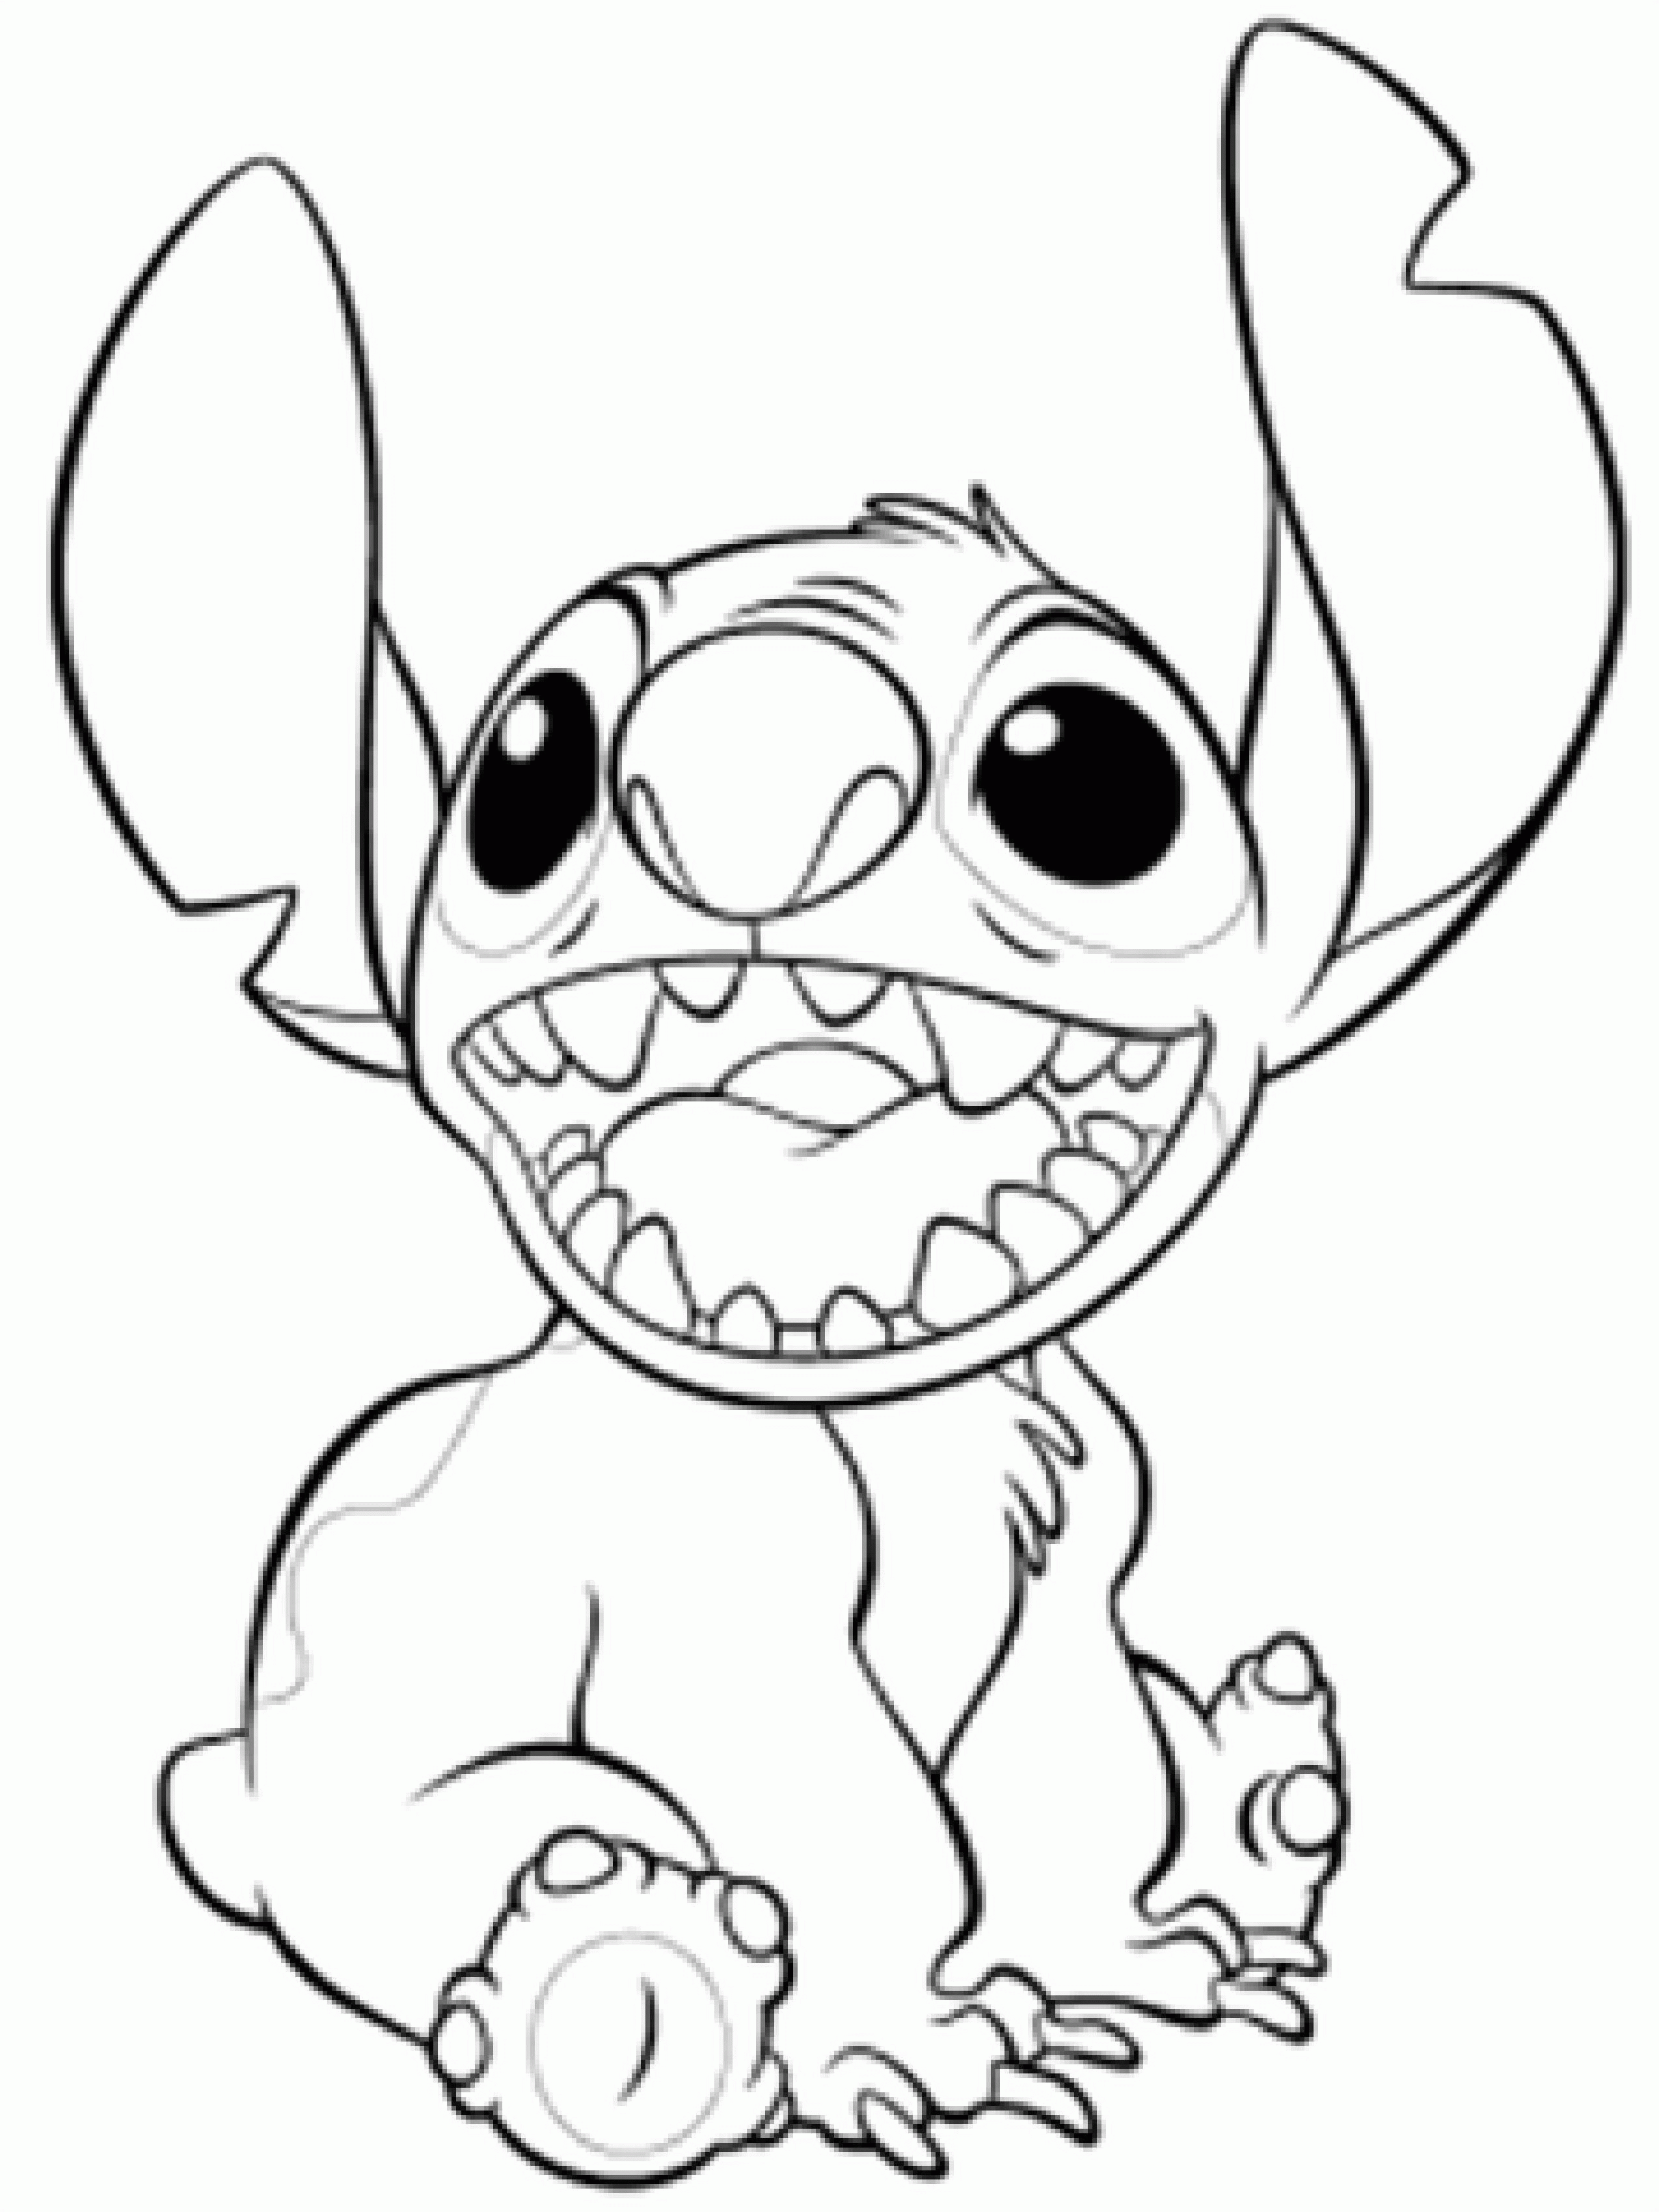 490 Animal Cool Coloring Pages To Print for Adult